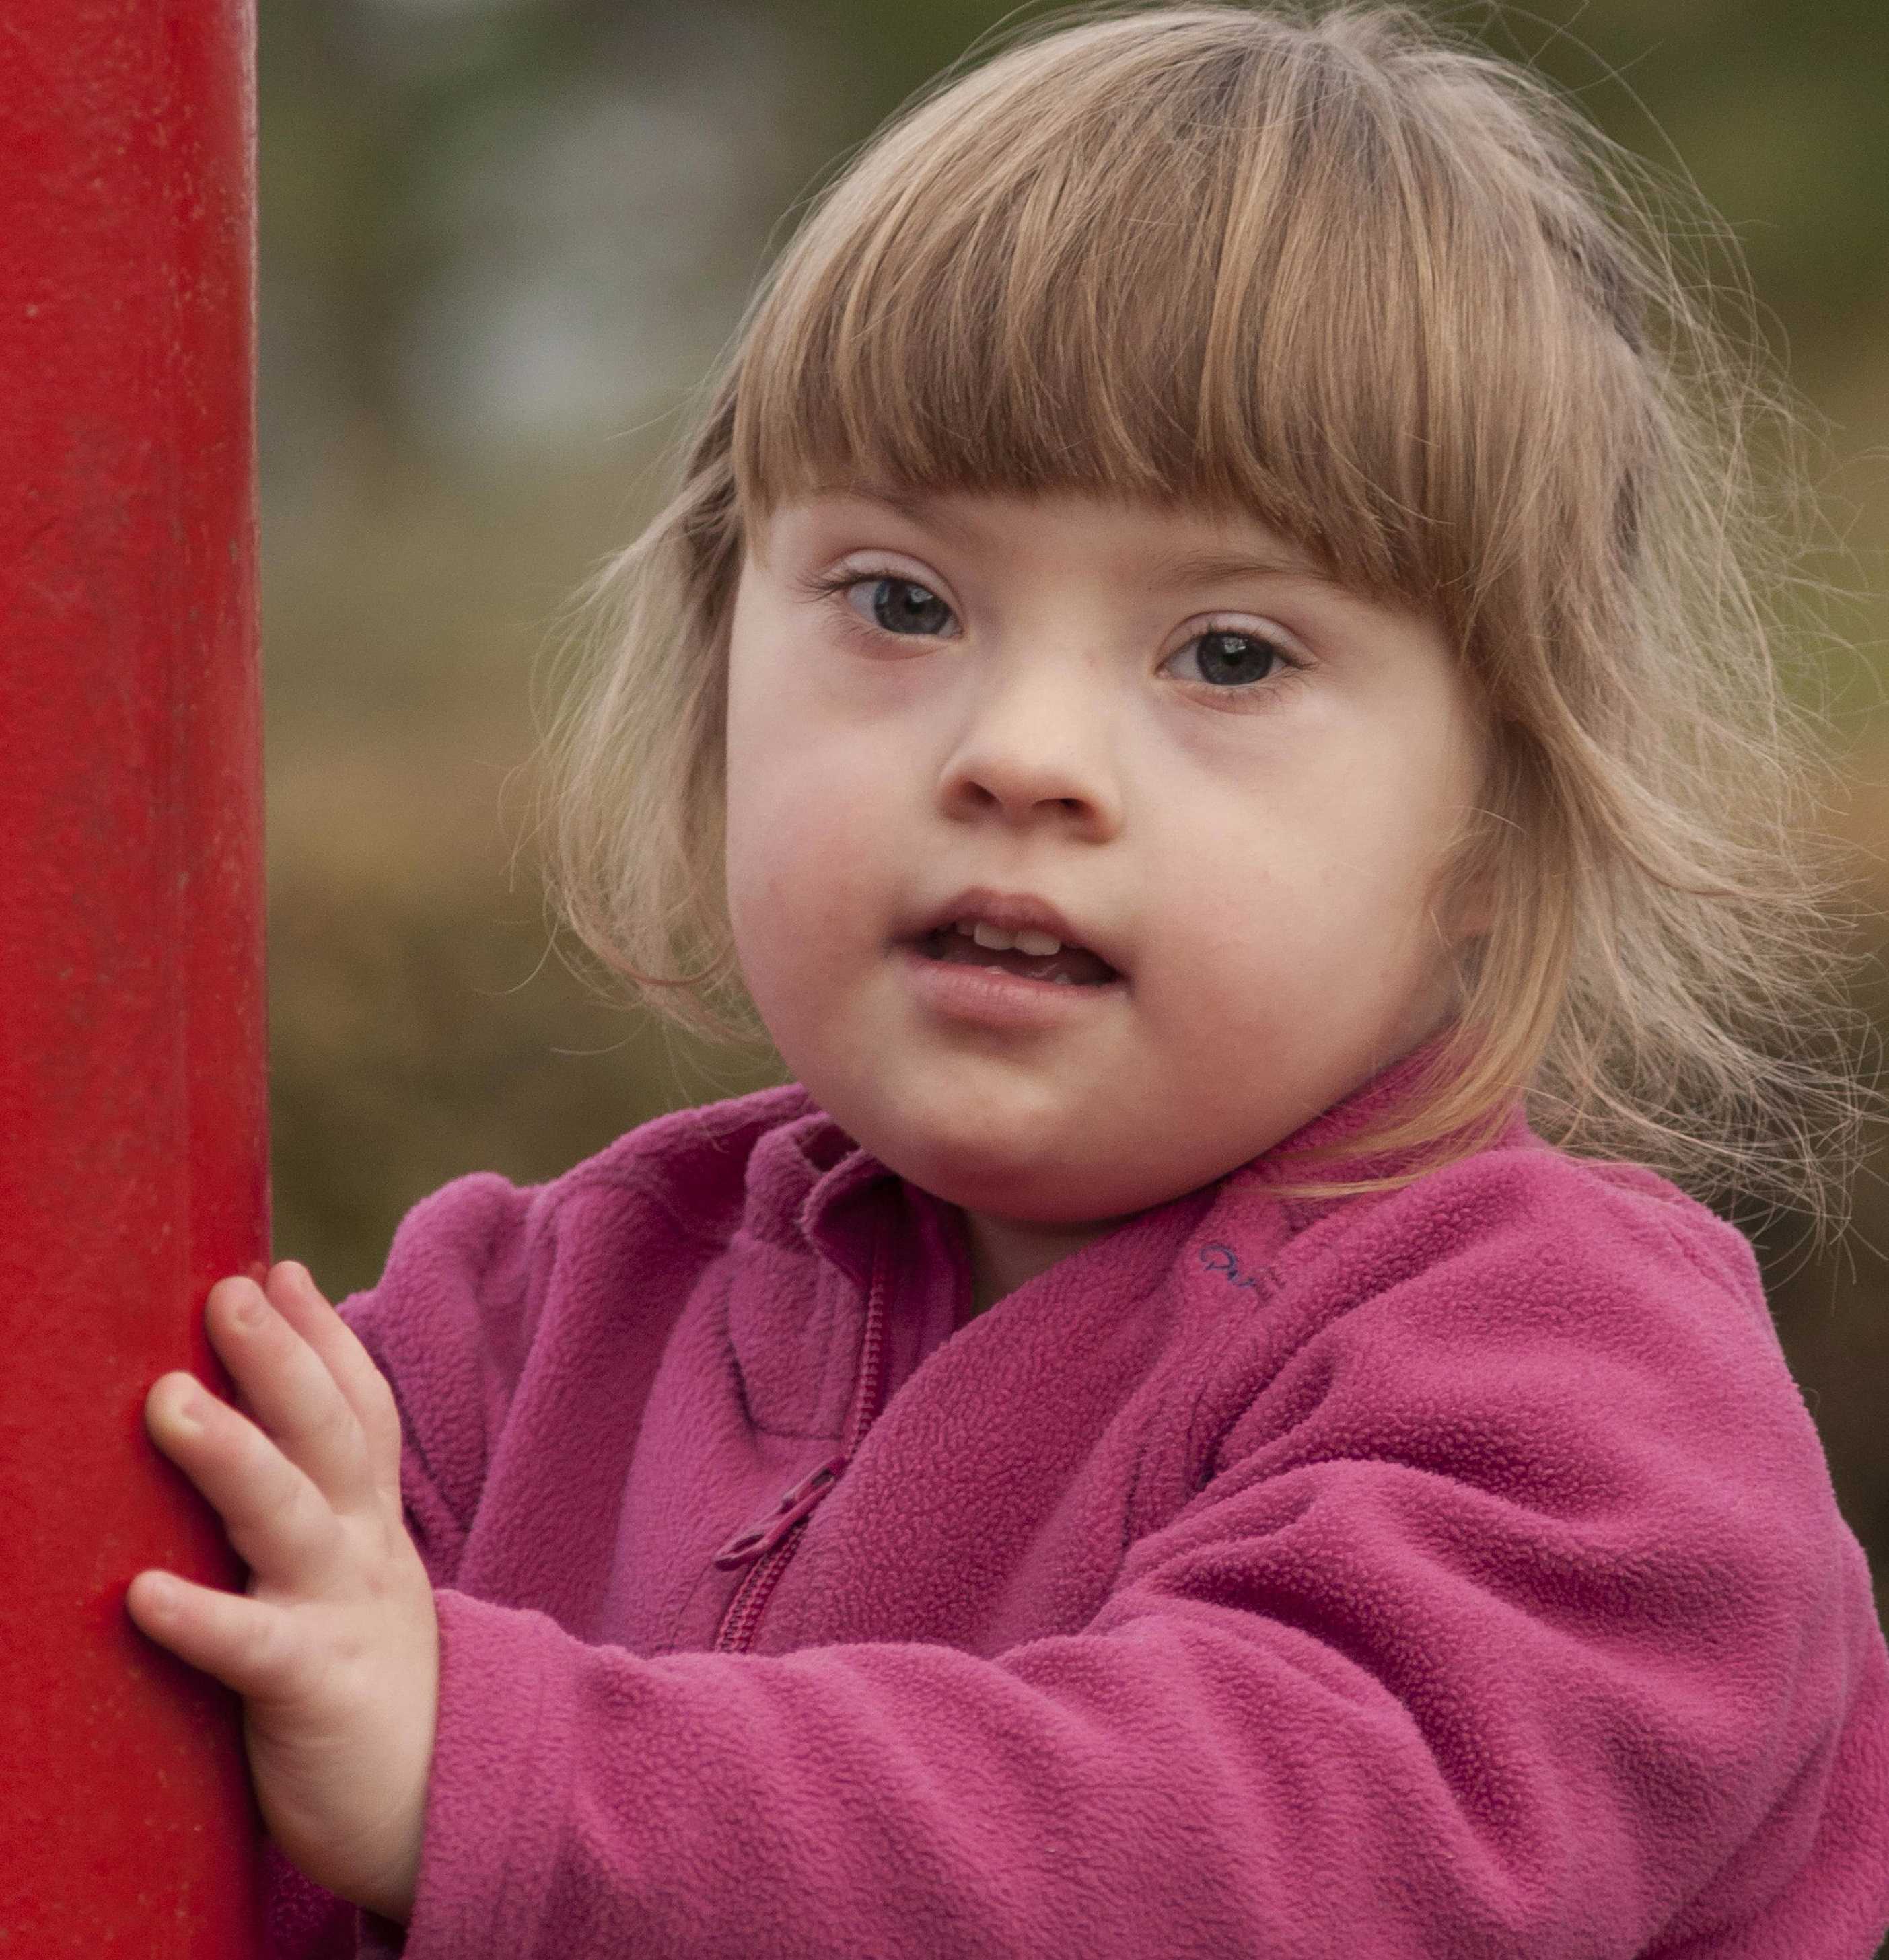 Indiana Passes Law Banning Abortion of Down Syndrome or Dwarfed Children